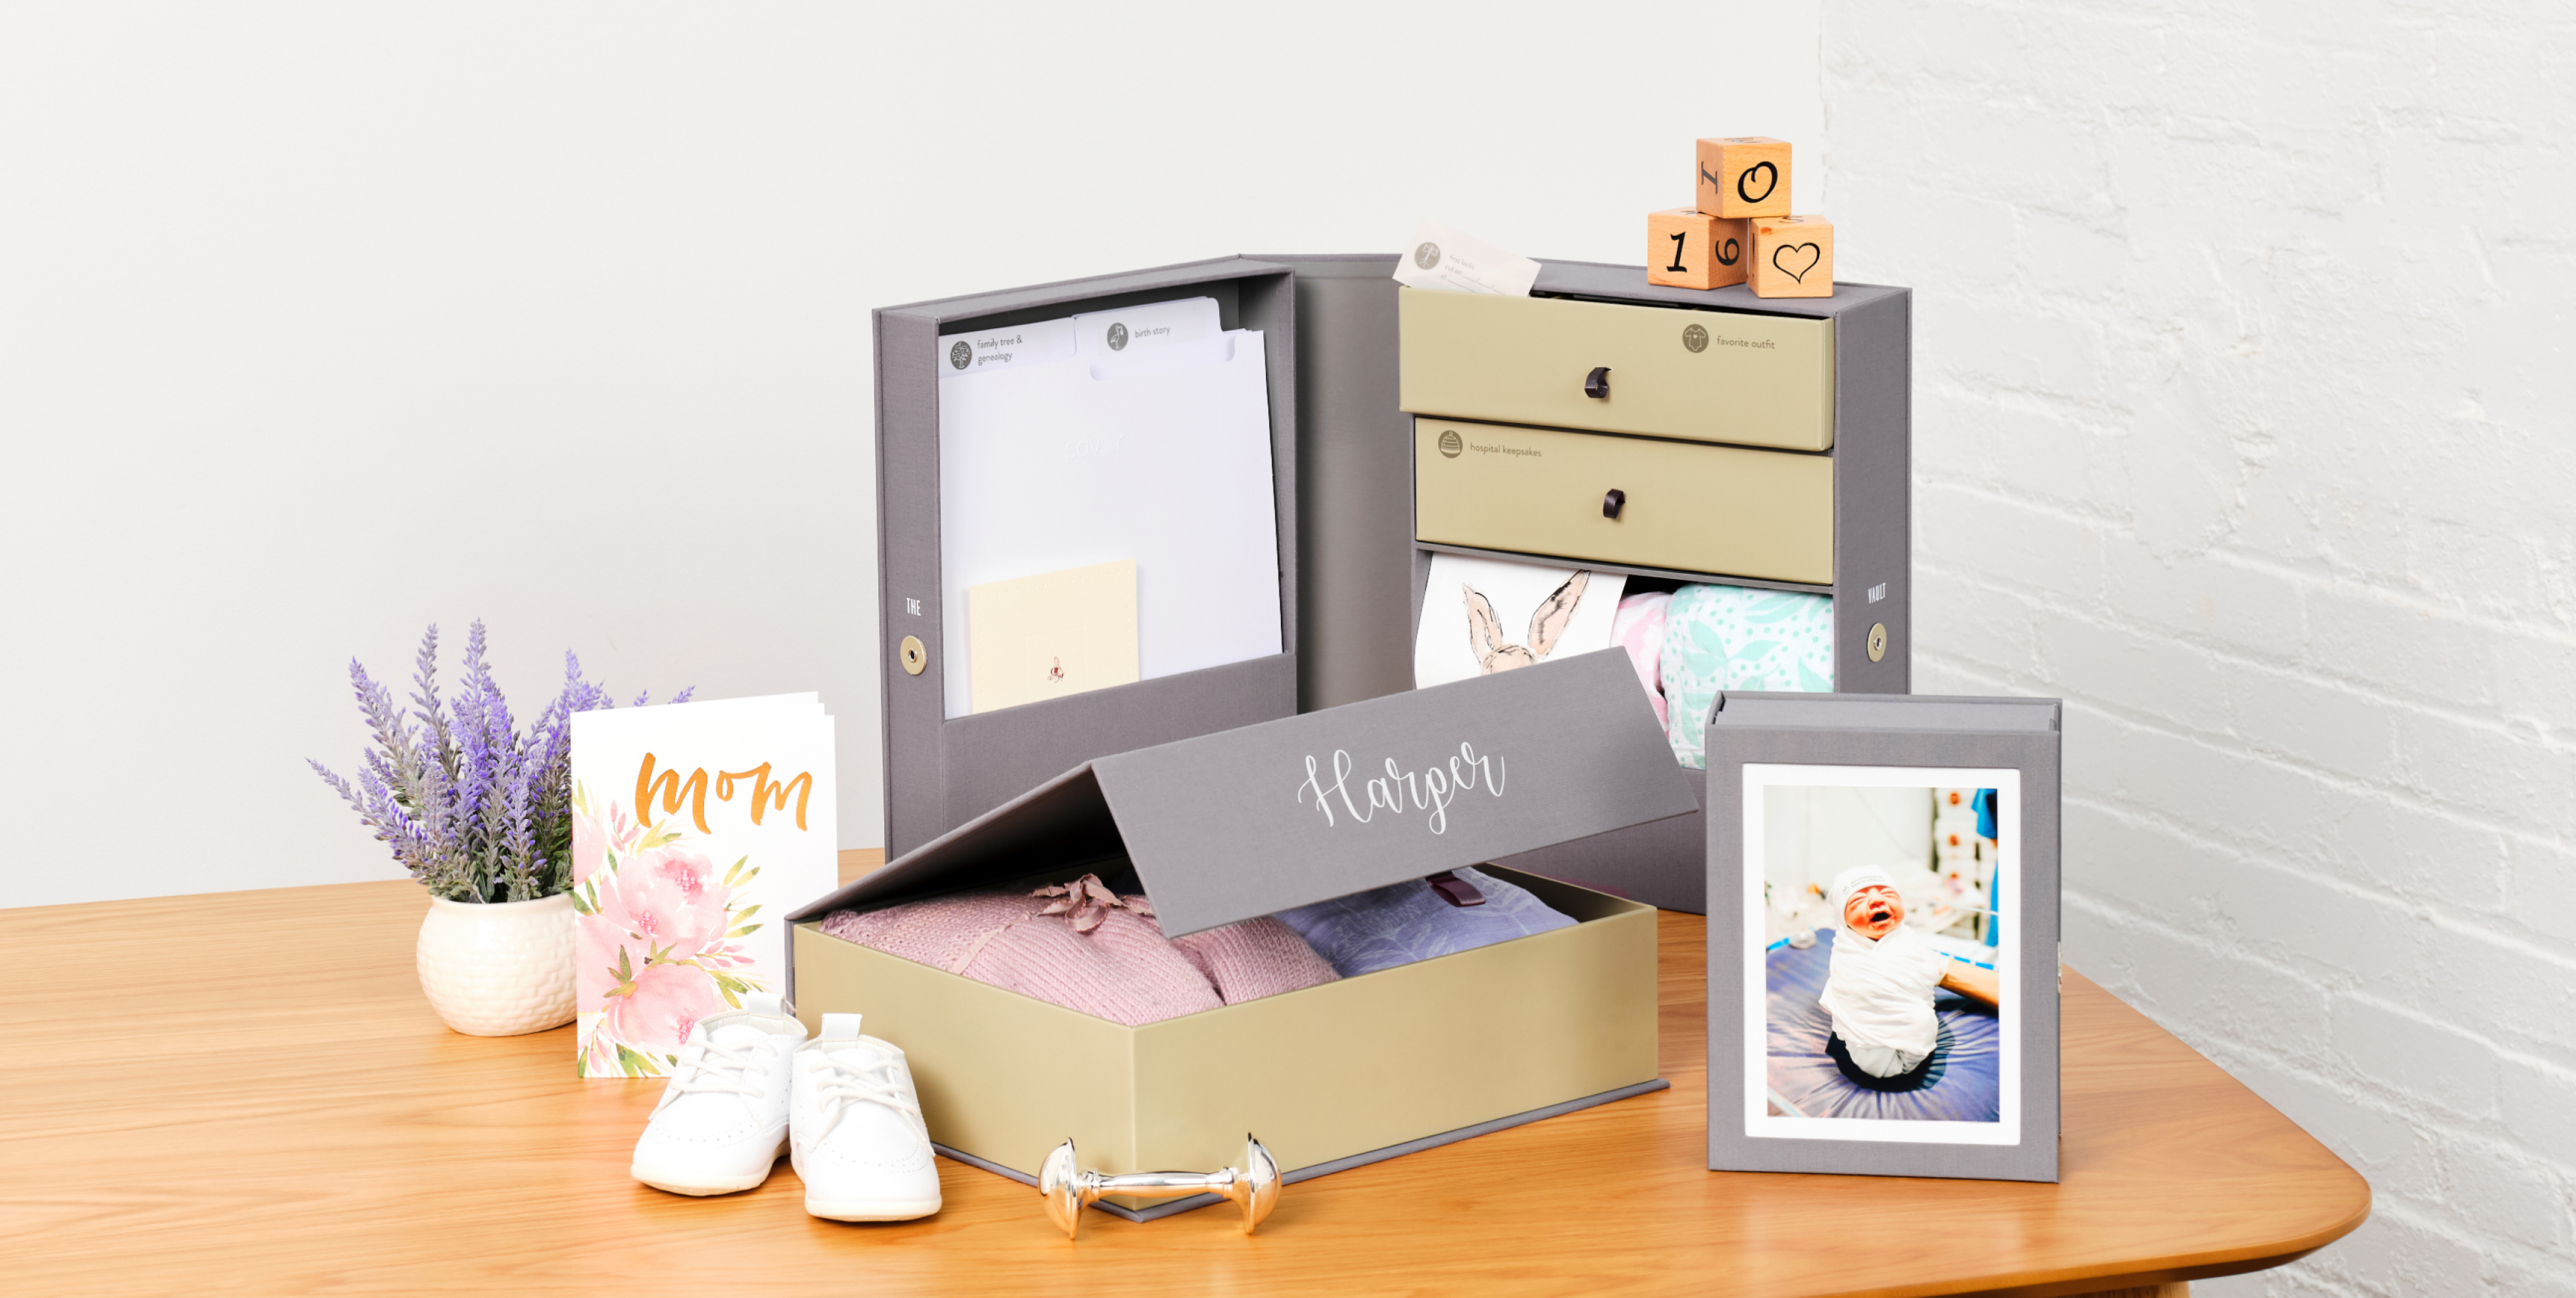 Grey organization set boxes for a newborn. Decorated with a picture of a baby, baby clothes and flowers.